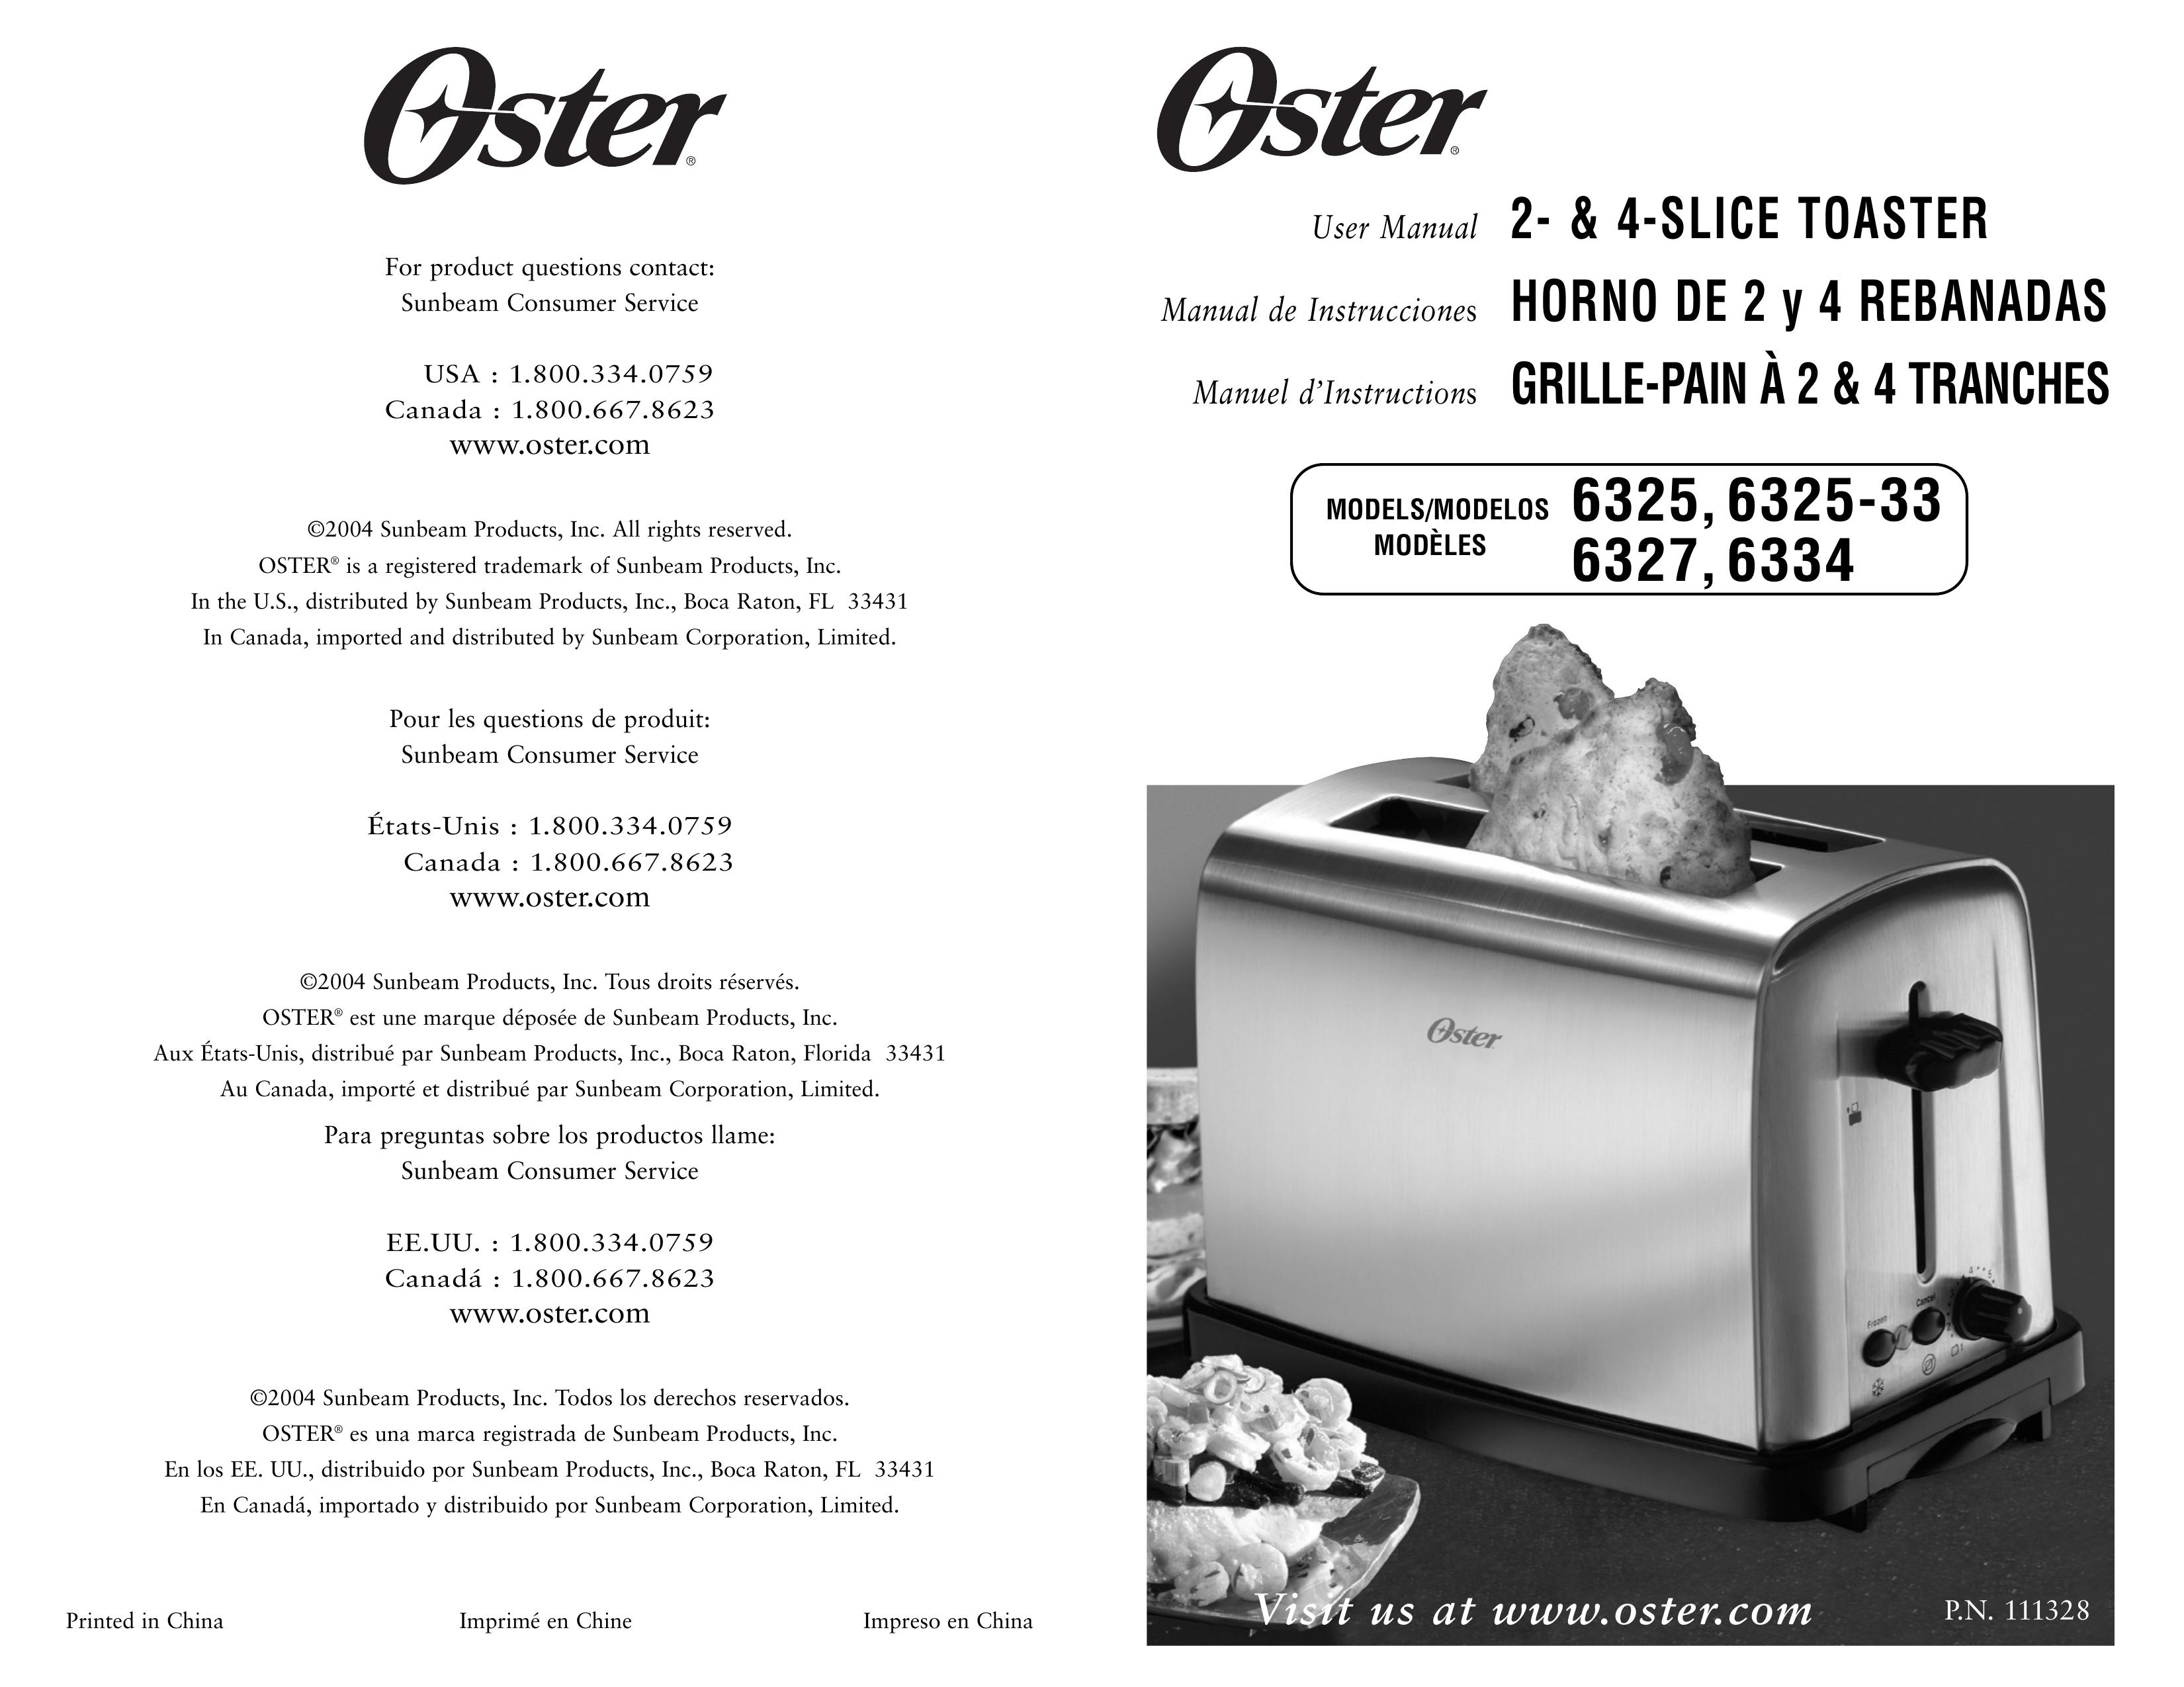 Oster 6327 Toaster User Manual